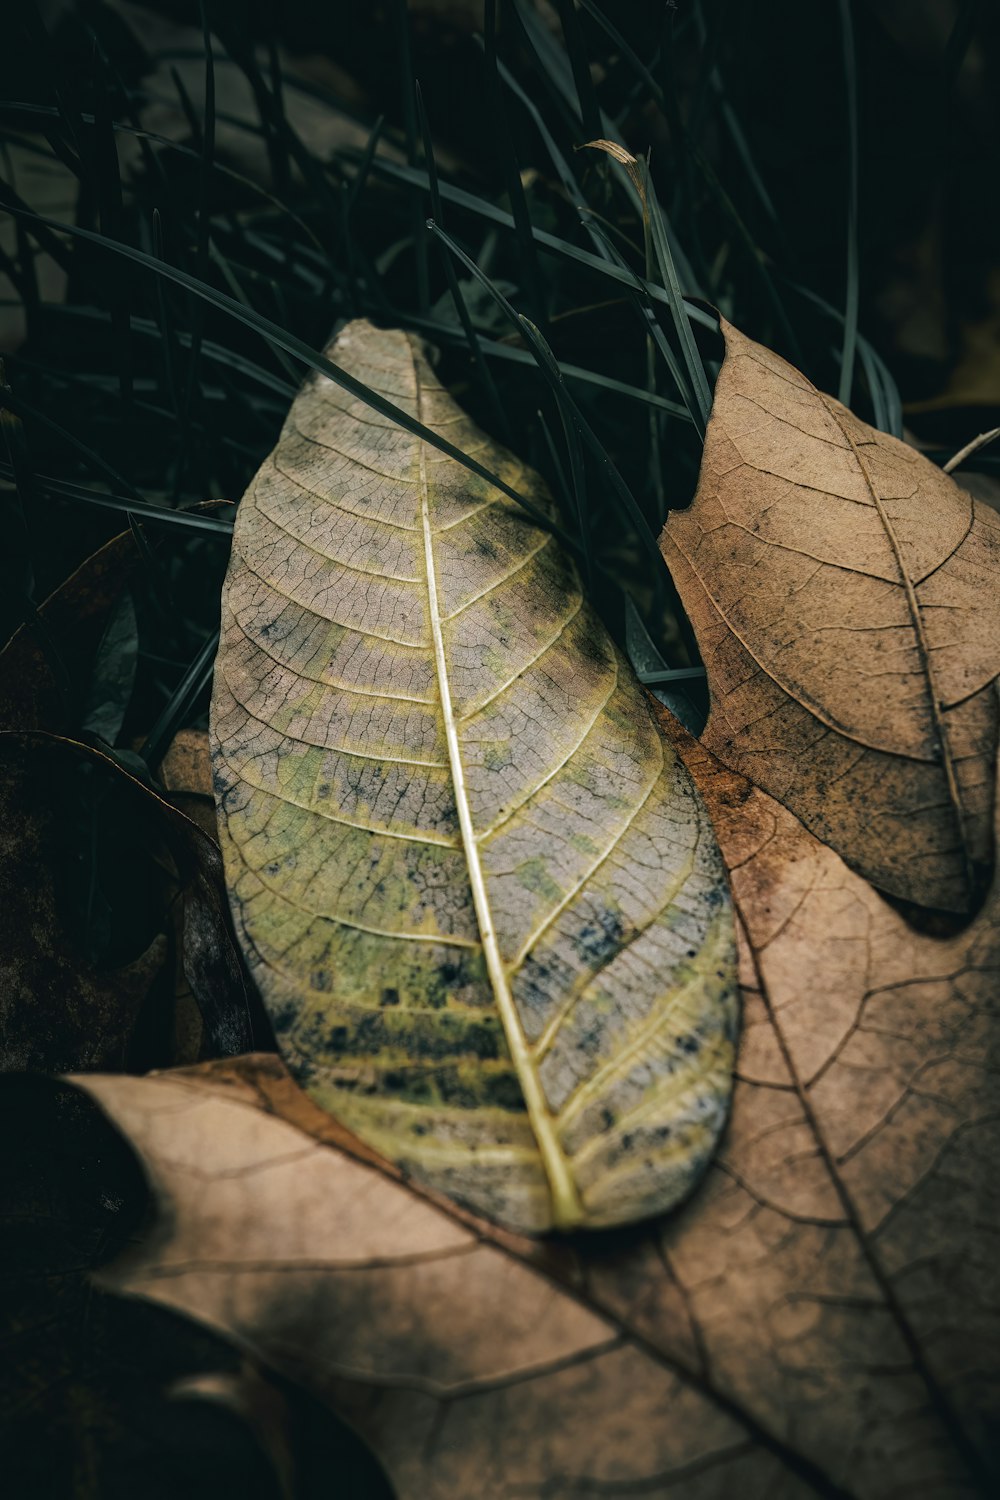 a close up of a leaf on the ground